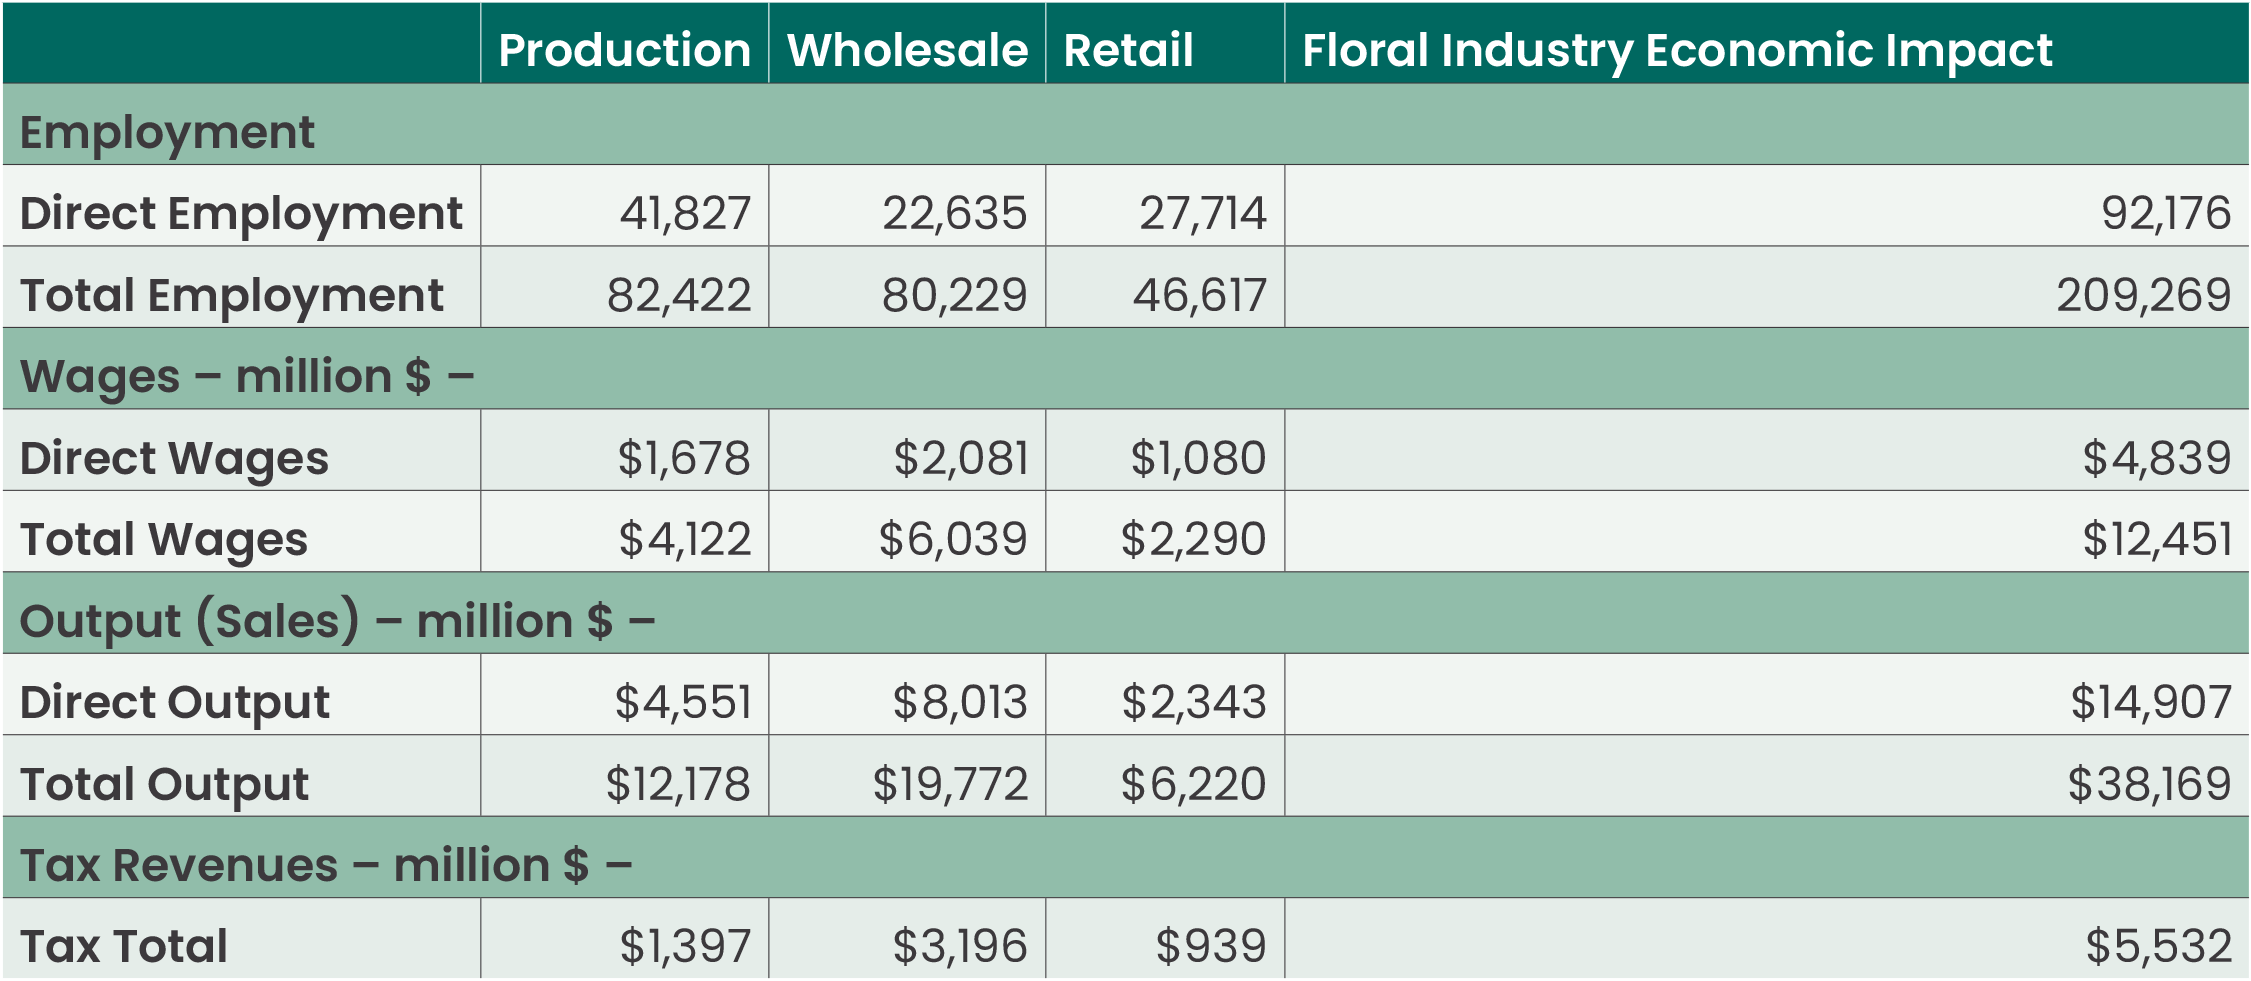 Chart showing the floral supply industry economic impact by business sector for 2019